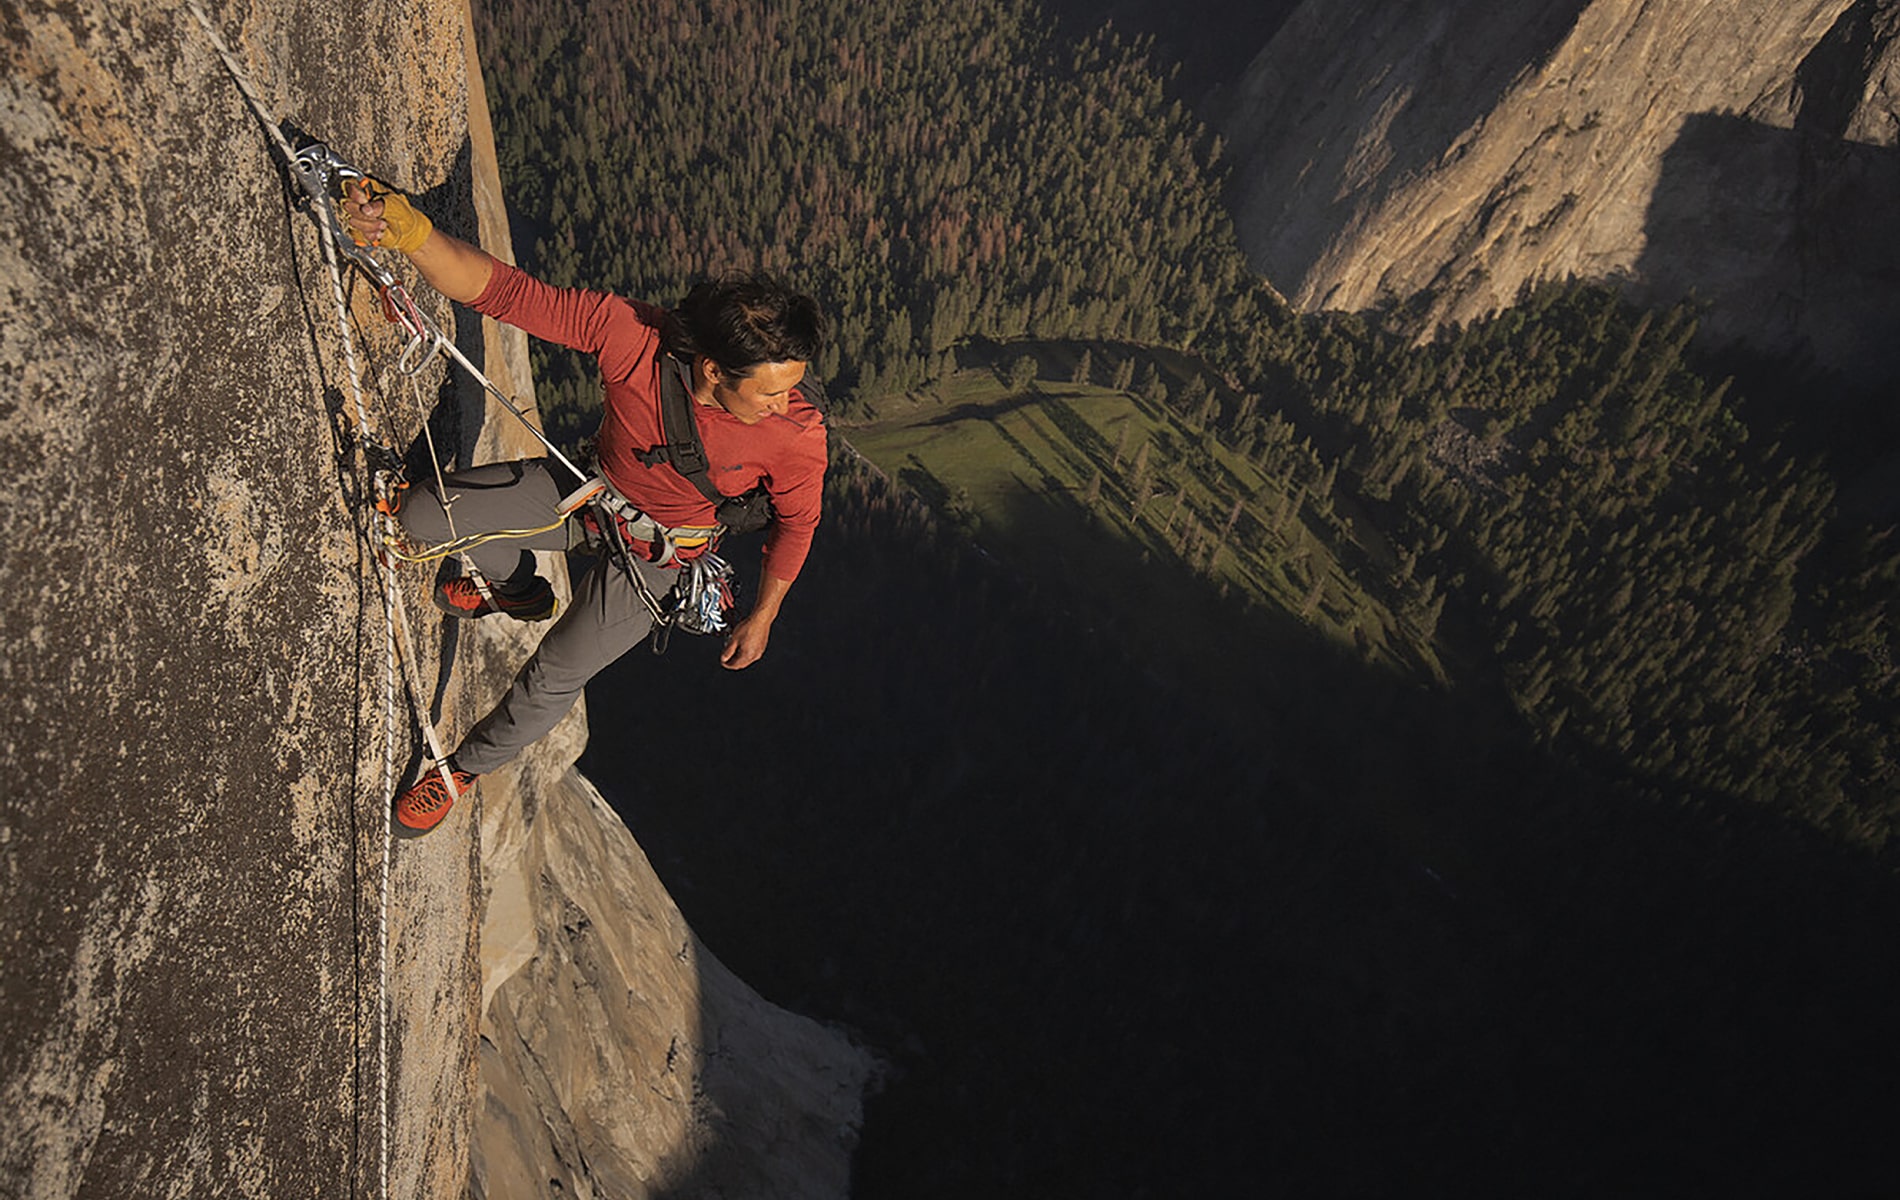 Jimmy Chin, Bremont